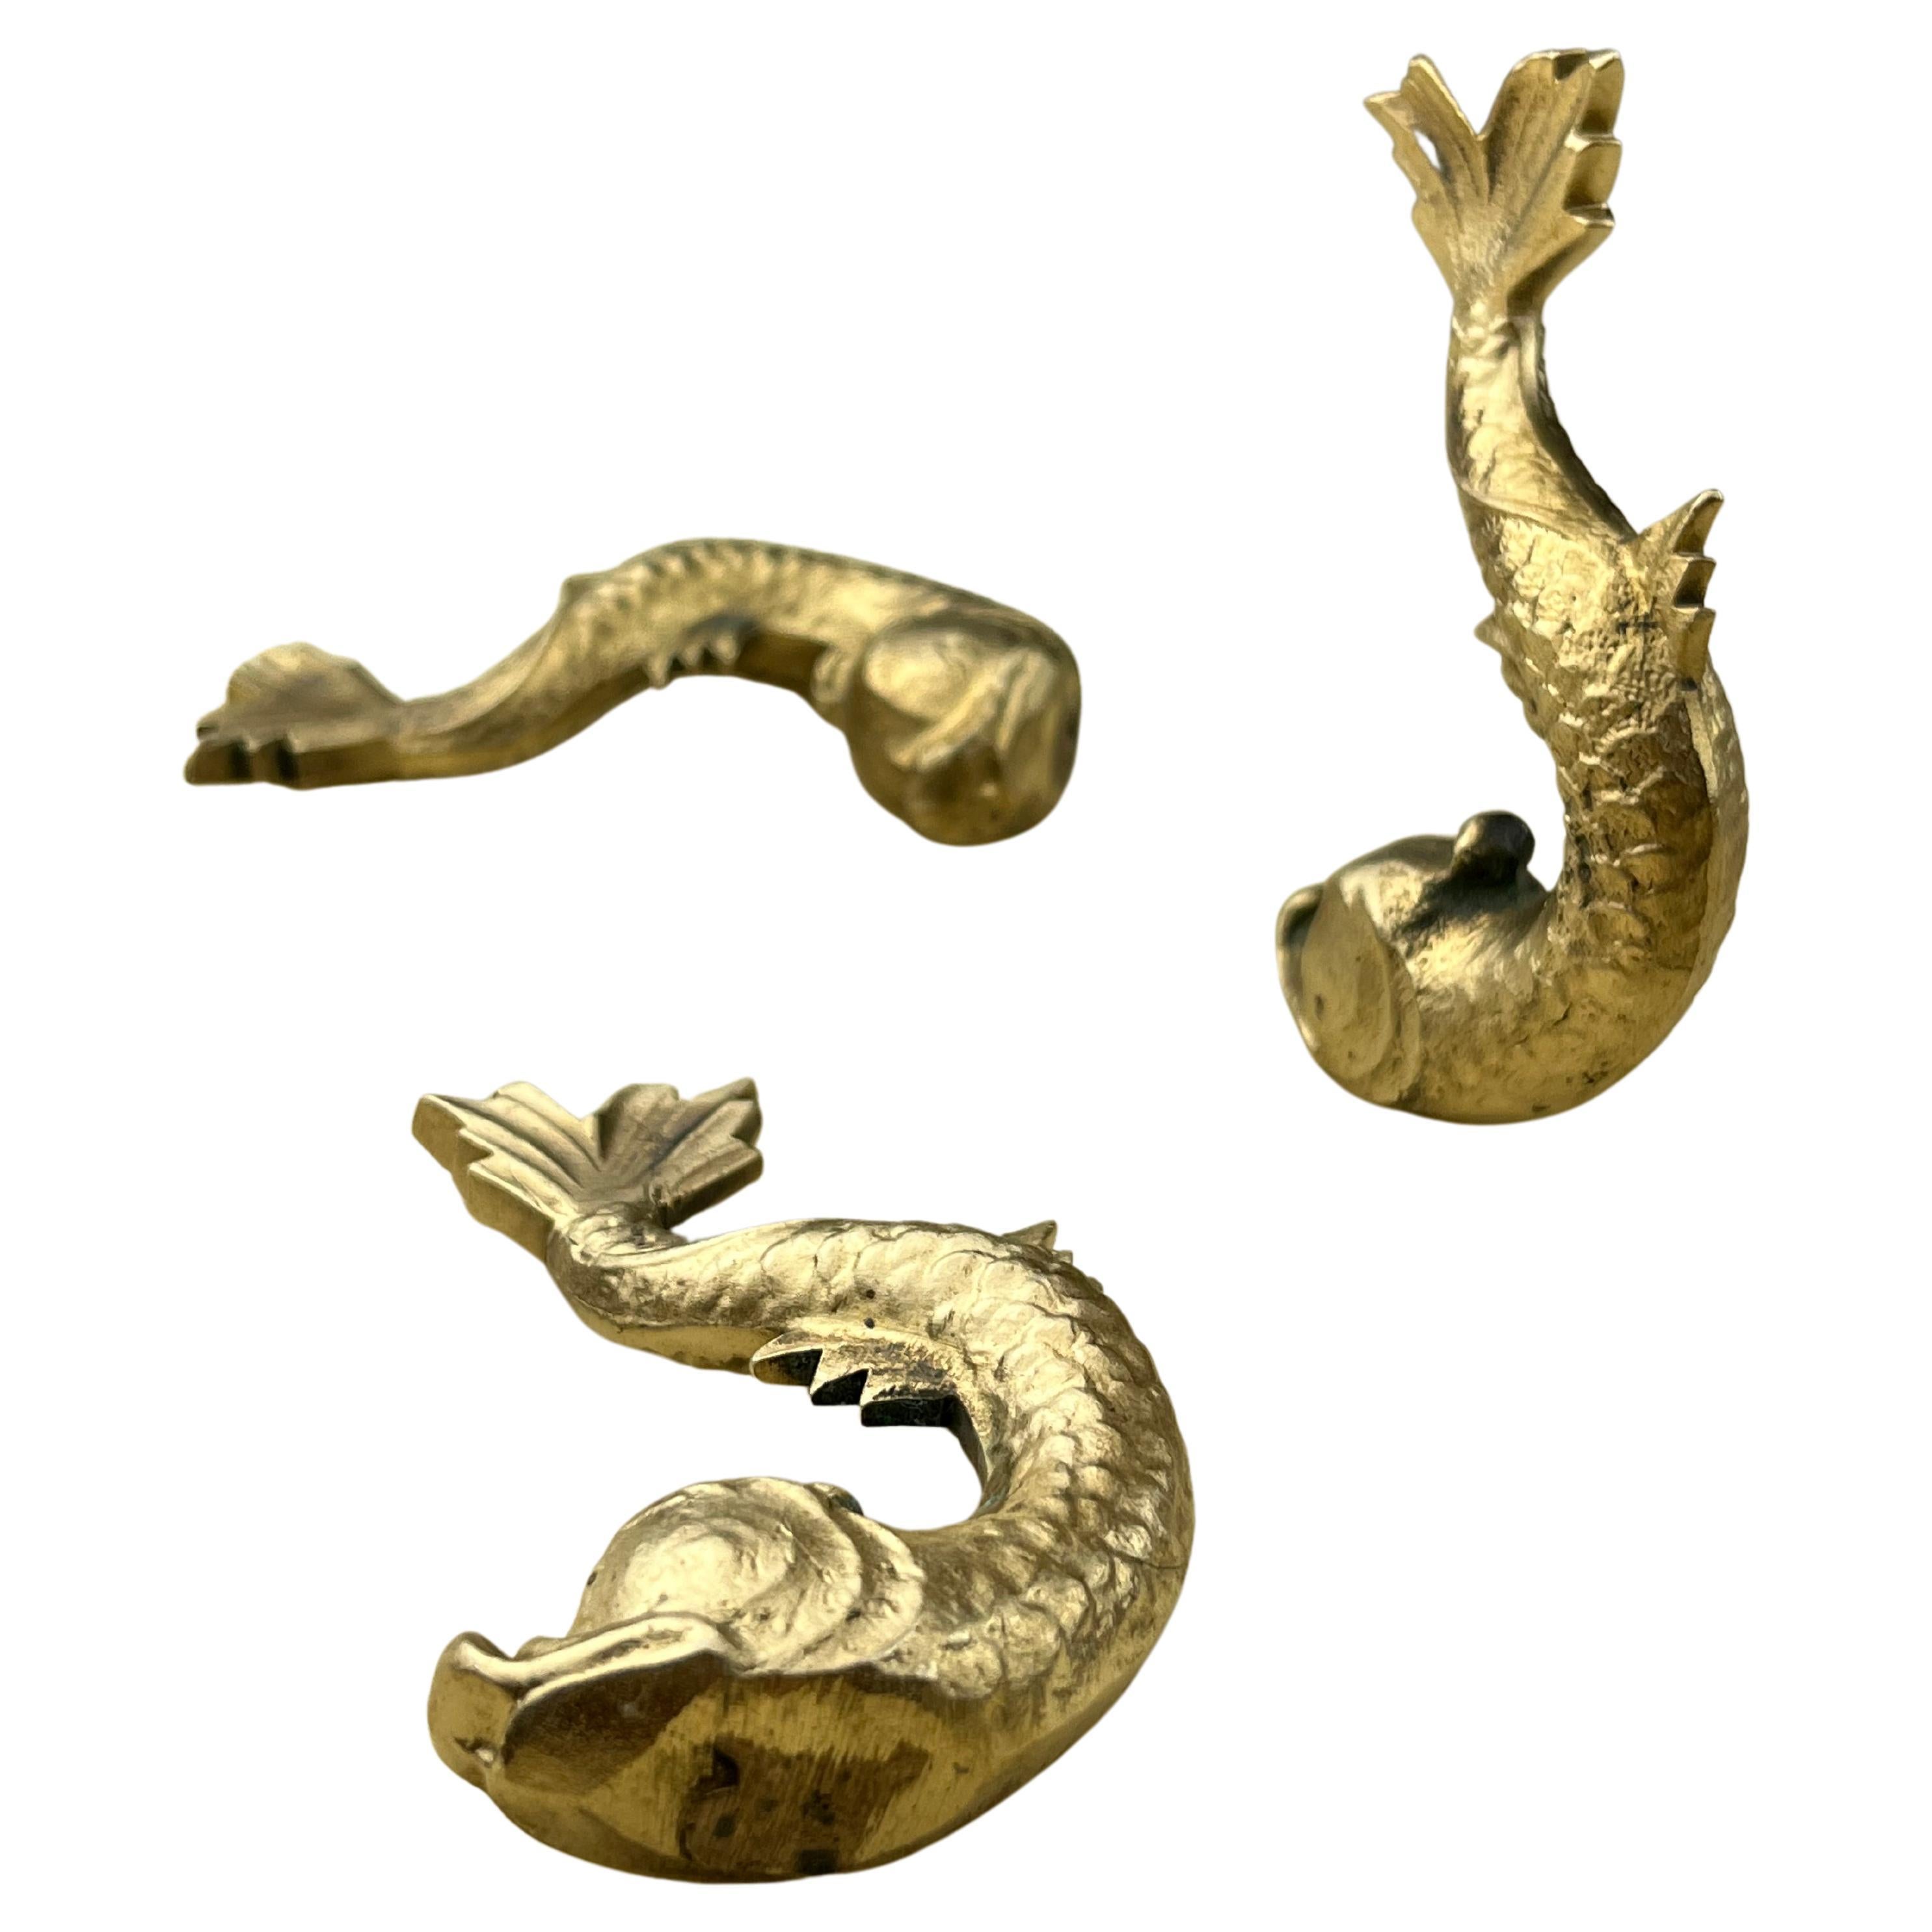 Three brass paperweights, Italy, 1960s.
They depict three small fish and were probably retrieved from a piece of furniture or a lamp.
Small signs of time and use.